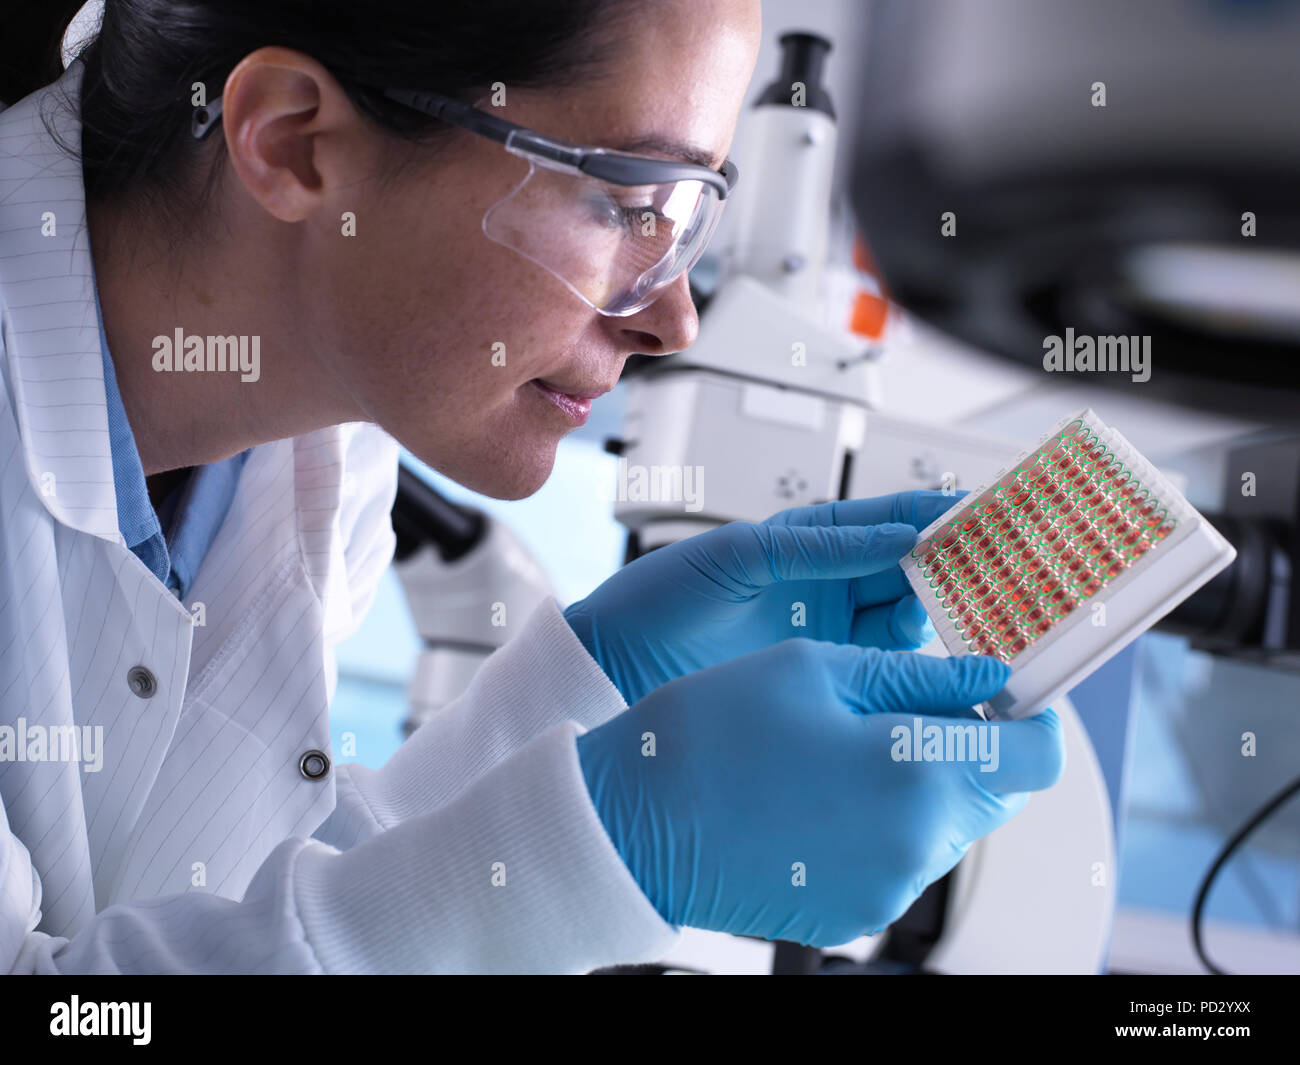 Scientist viewing a multi well plate containing blood samples for screening Stock Photo